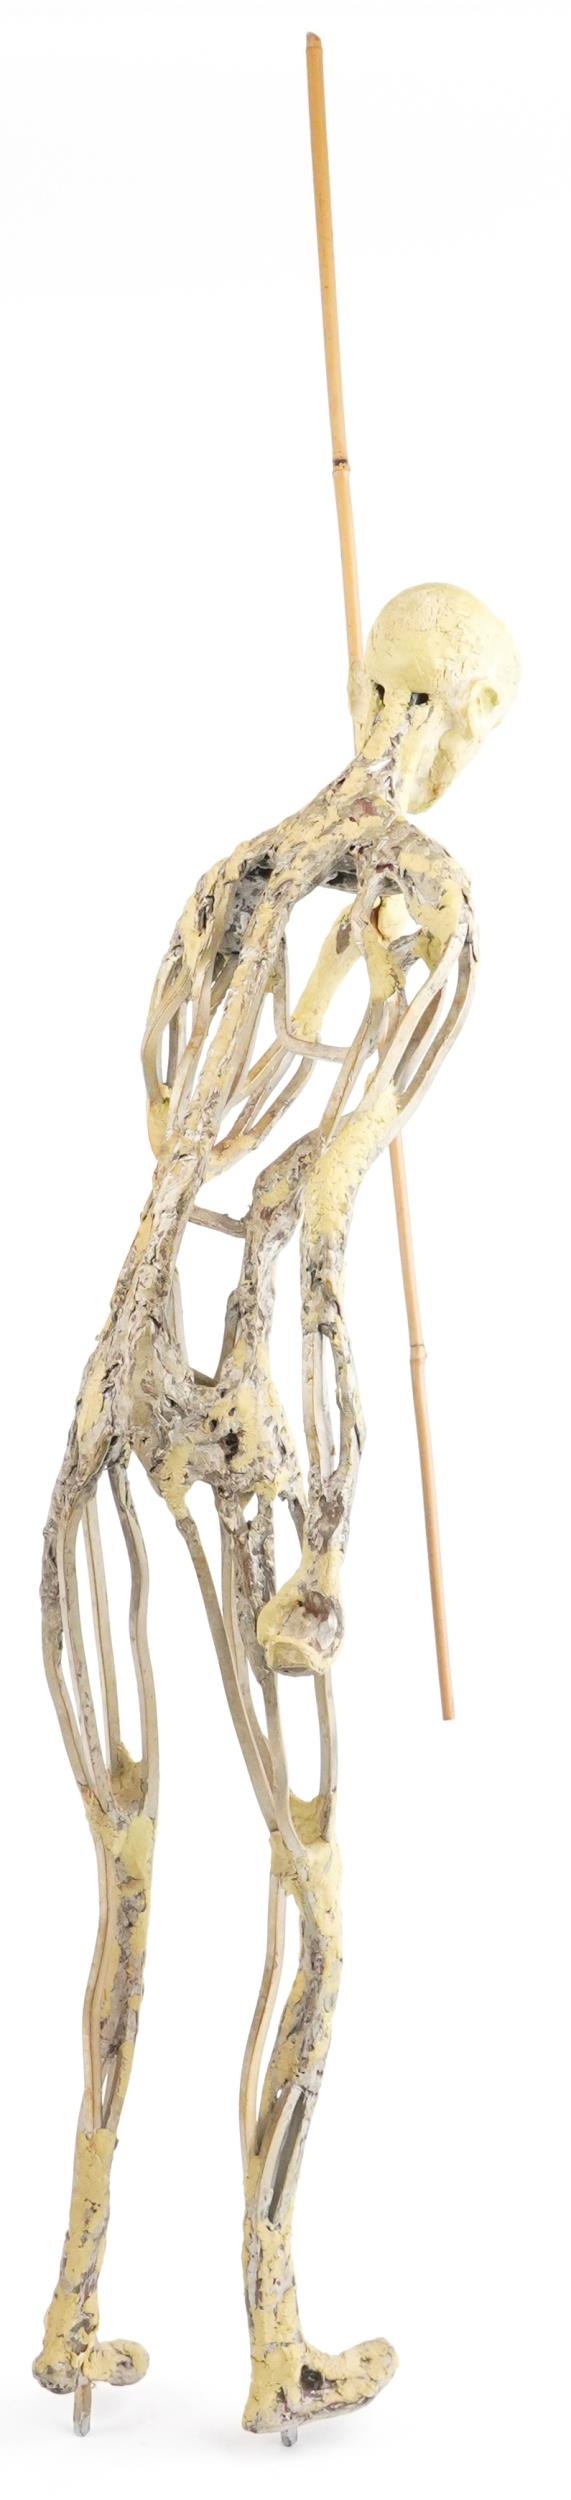 Neil Wilkinson, large contemporary Brutalist sculpture of a man holding a stick, overall 120cm high - Image 3 of 4